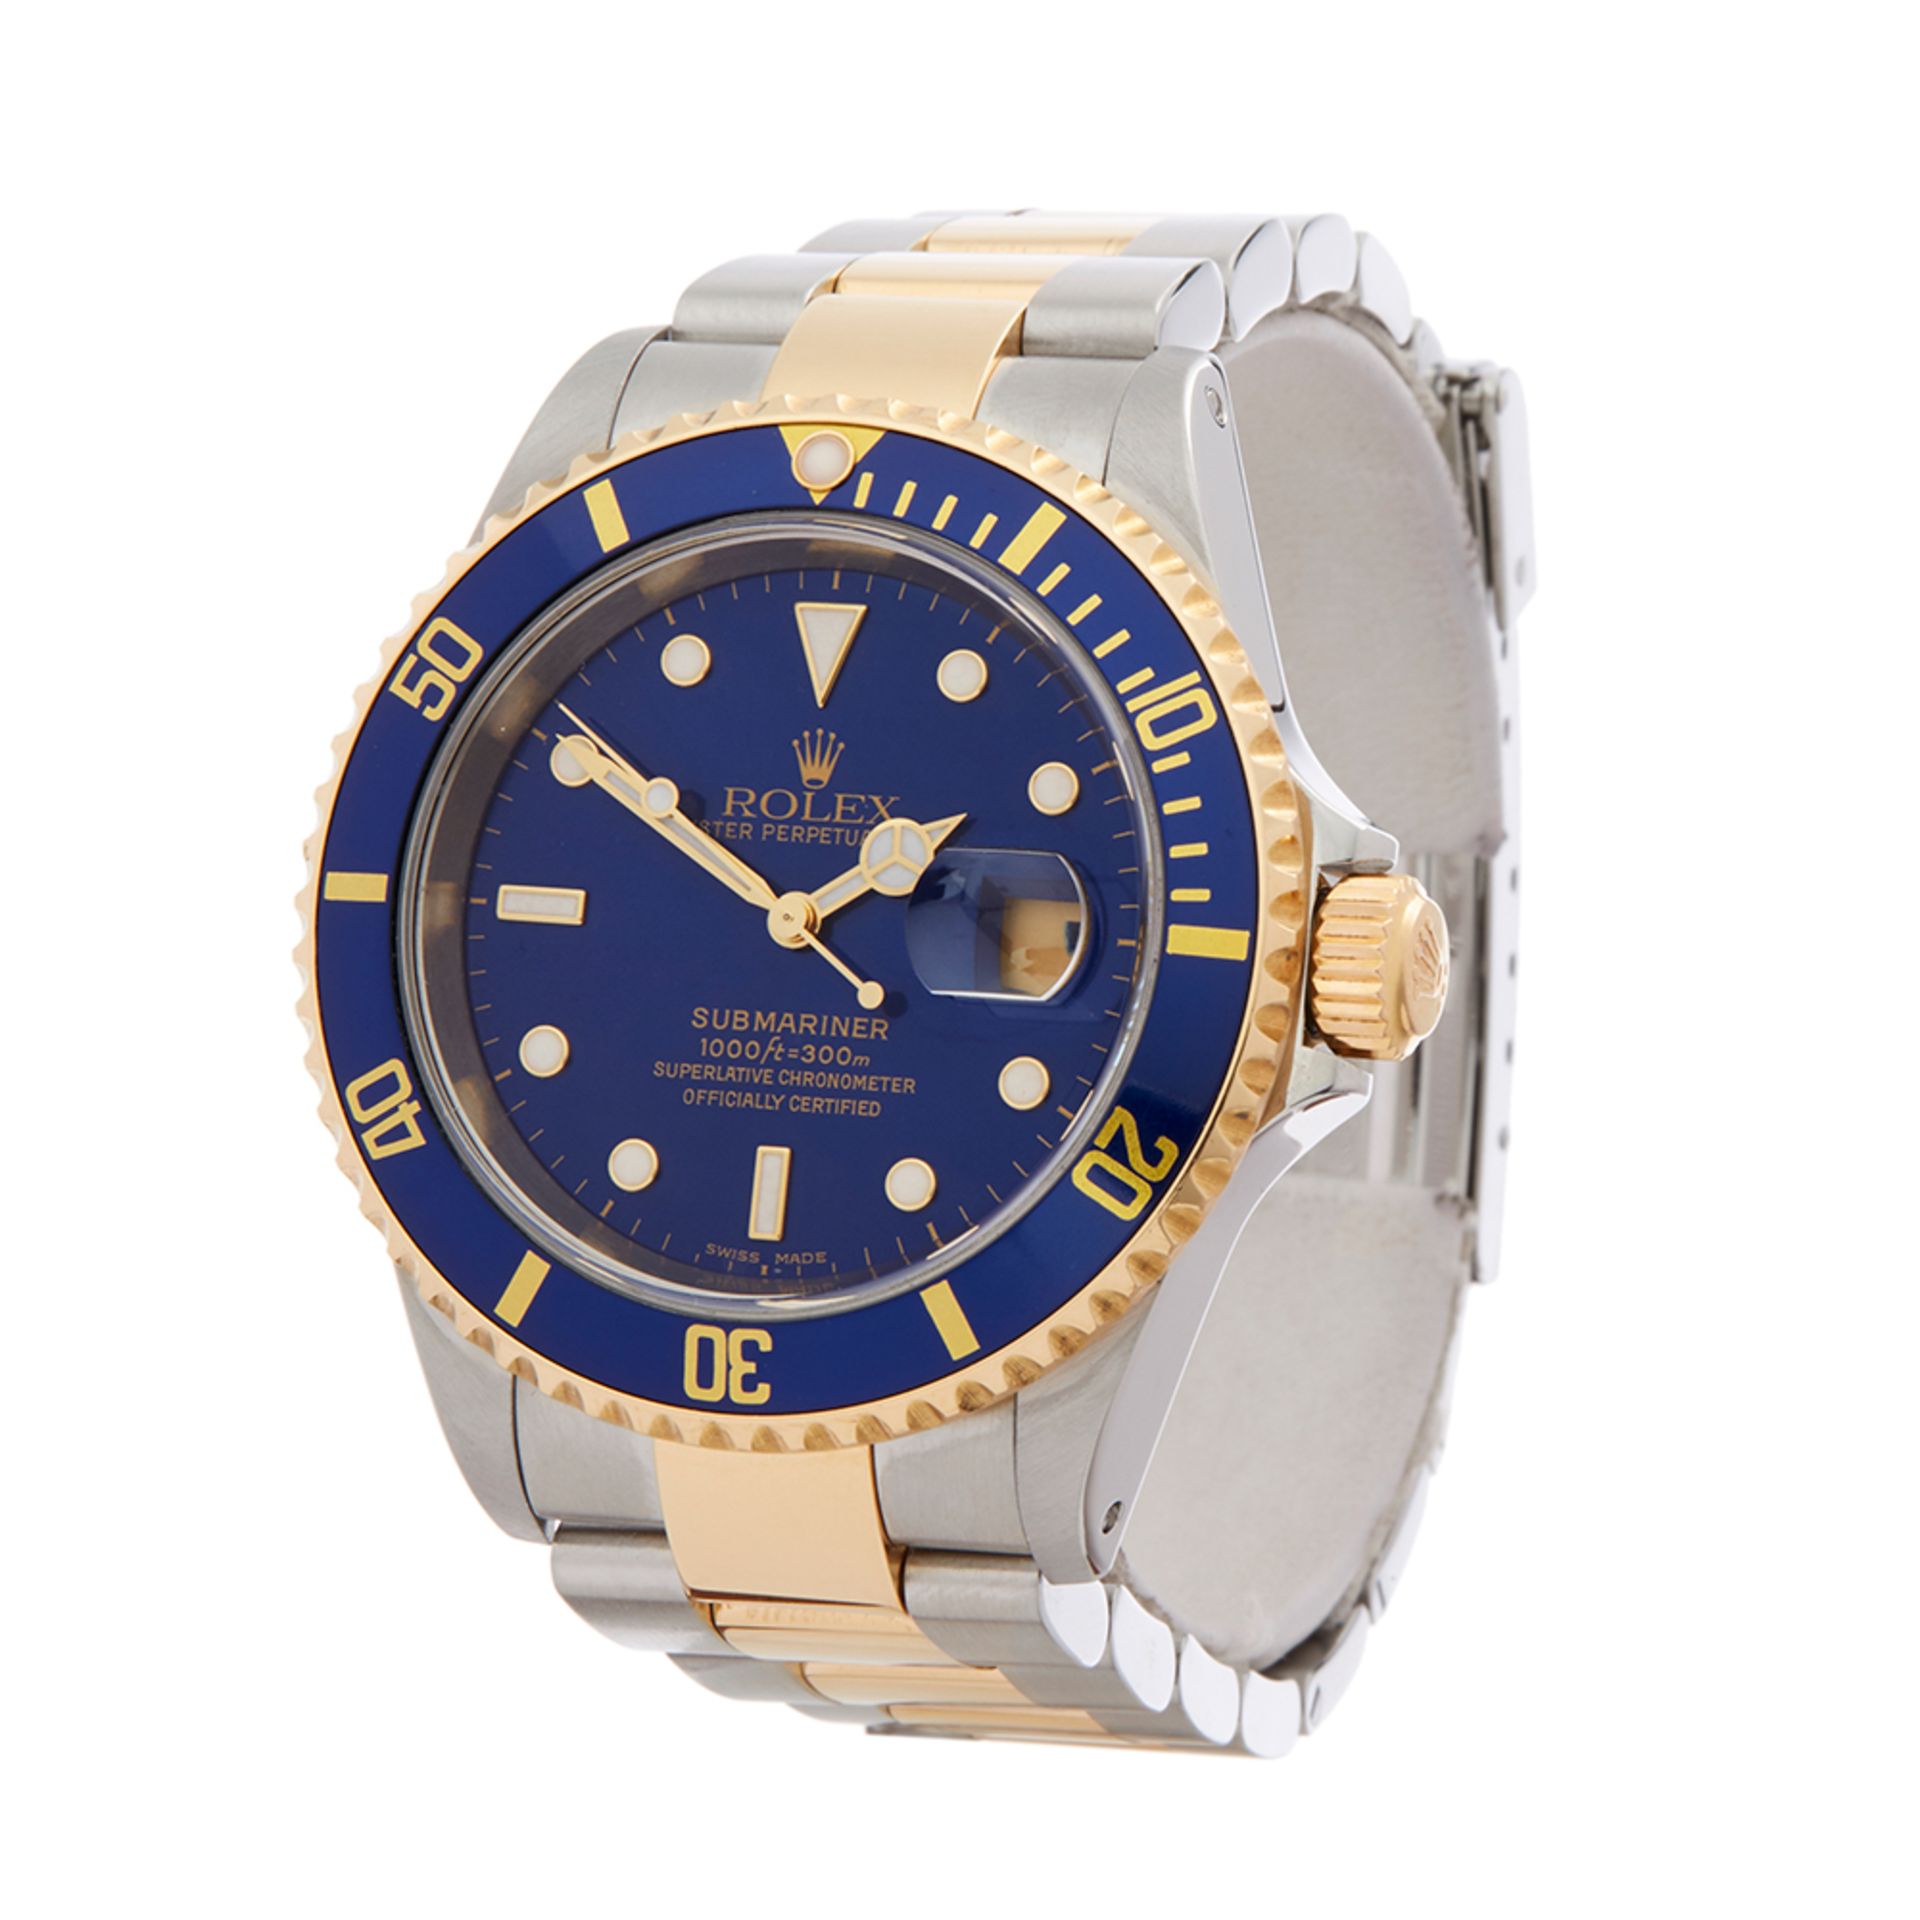 2002 Rolex Submariner Stainless Steel & 18K Yellow Gold - 16613LB - Image 8 of 8